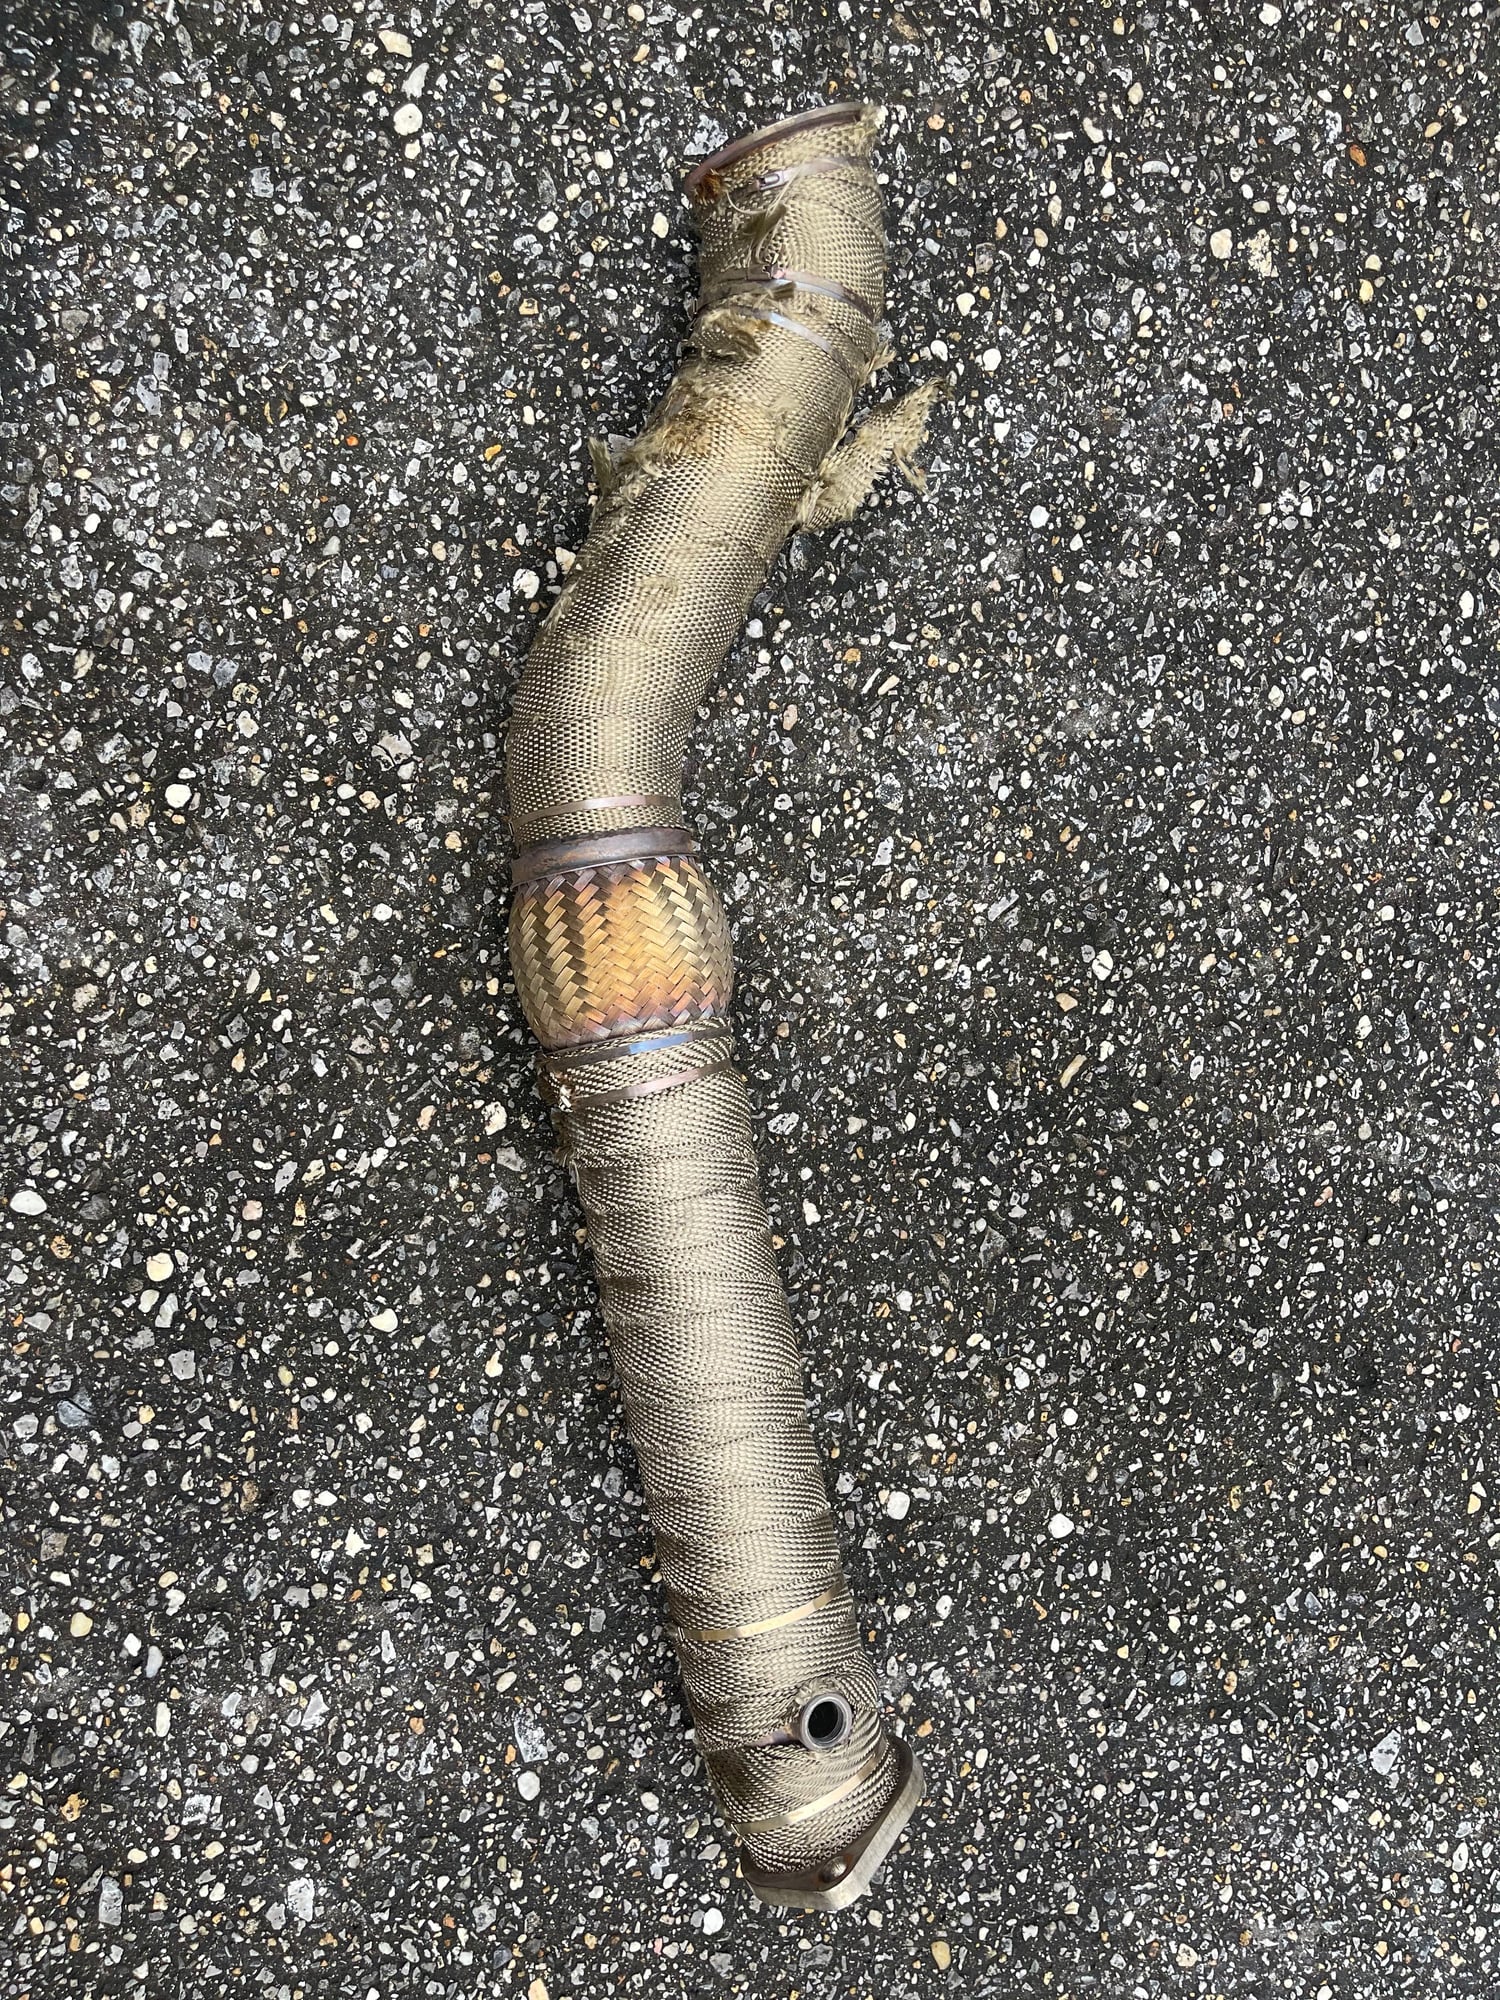 1994 Mazda RX-7 - EFR turbo down pipe (made by Turbosource) - Miscellaneous - $250 - Ft Walton Beach, FL 32548, United States